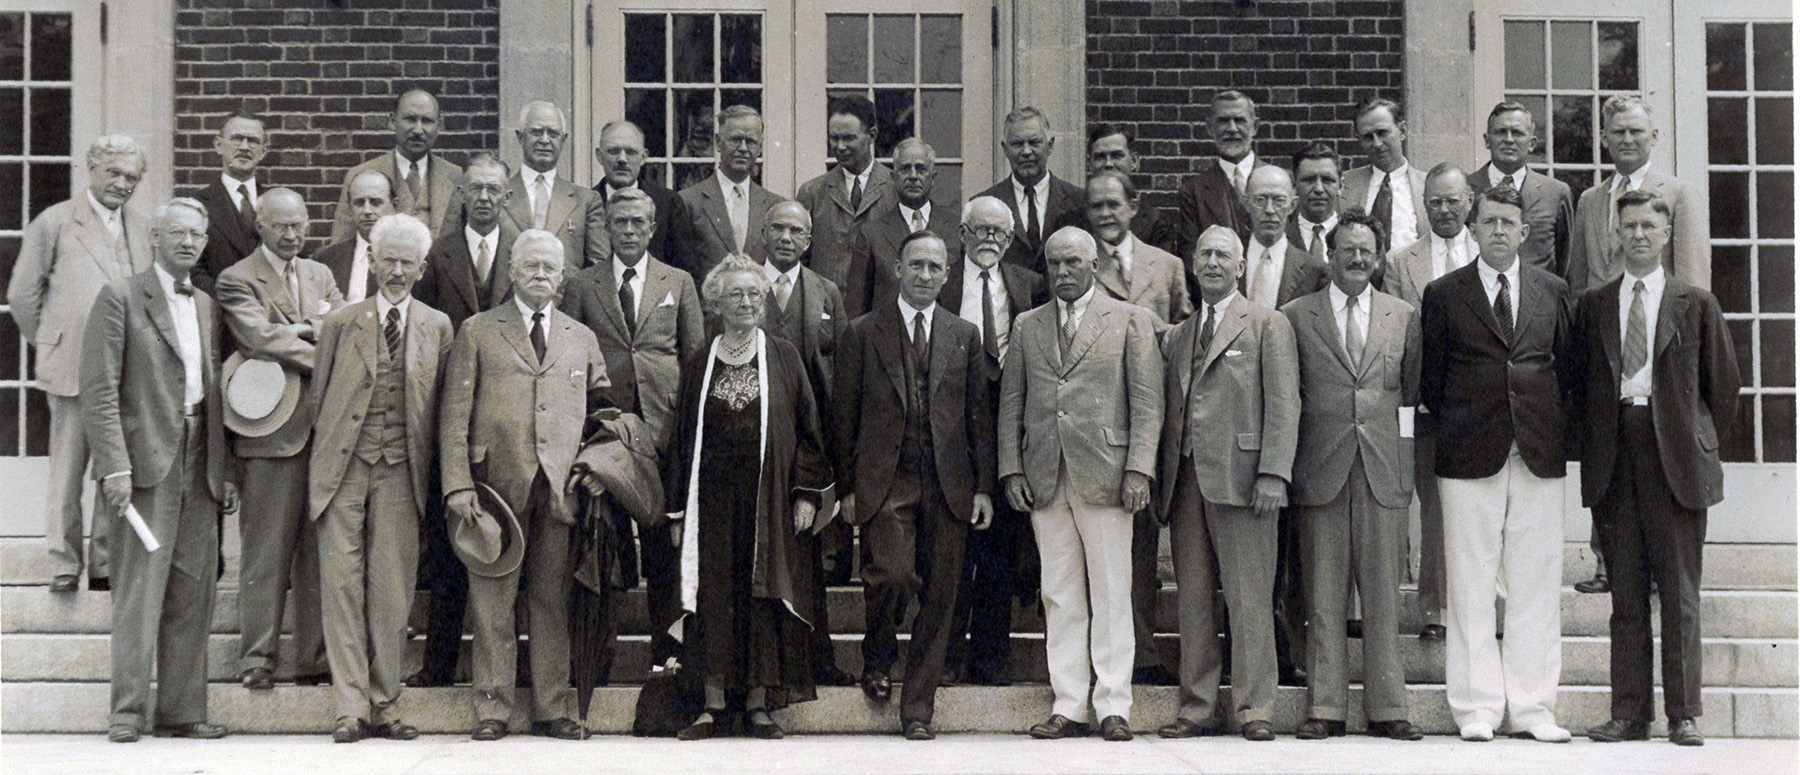 Cornelia Clapp with the MBL Board of Trustees, circa 1933. Credit: MBL Archives